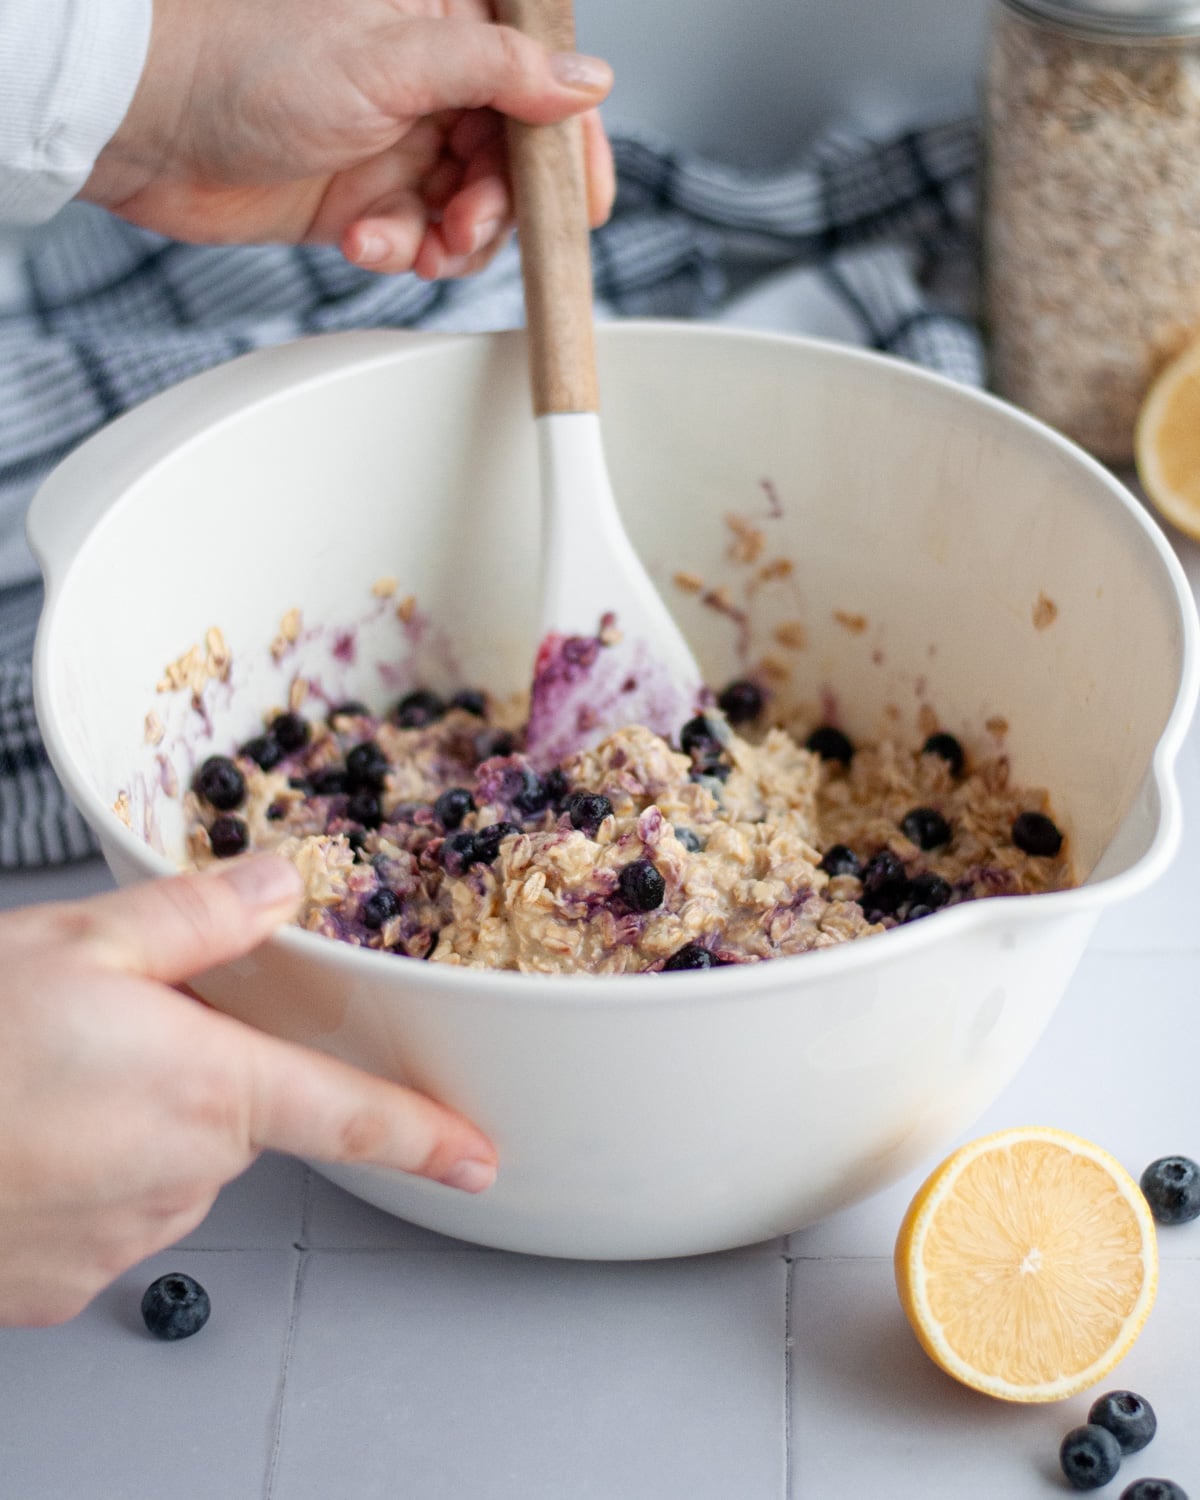 Process shot showing how to make lemon blueberry applesauce baked oatmeal, gently stirring in the frozen blueberries into the oatmeal mixture in a large mixing bowl.